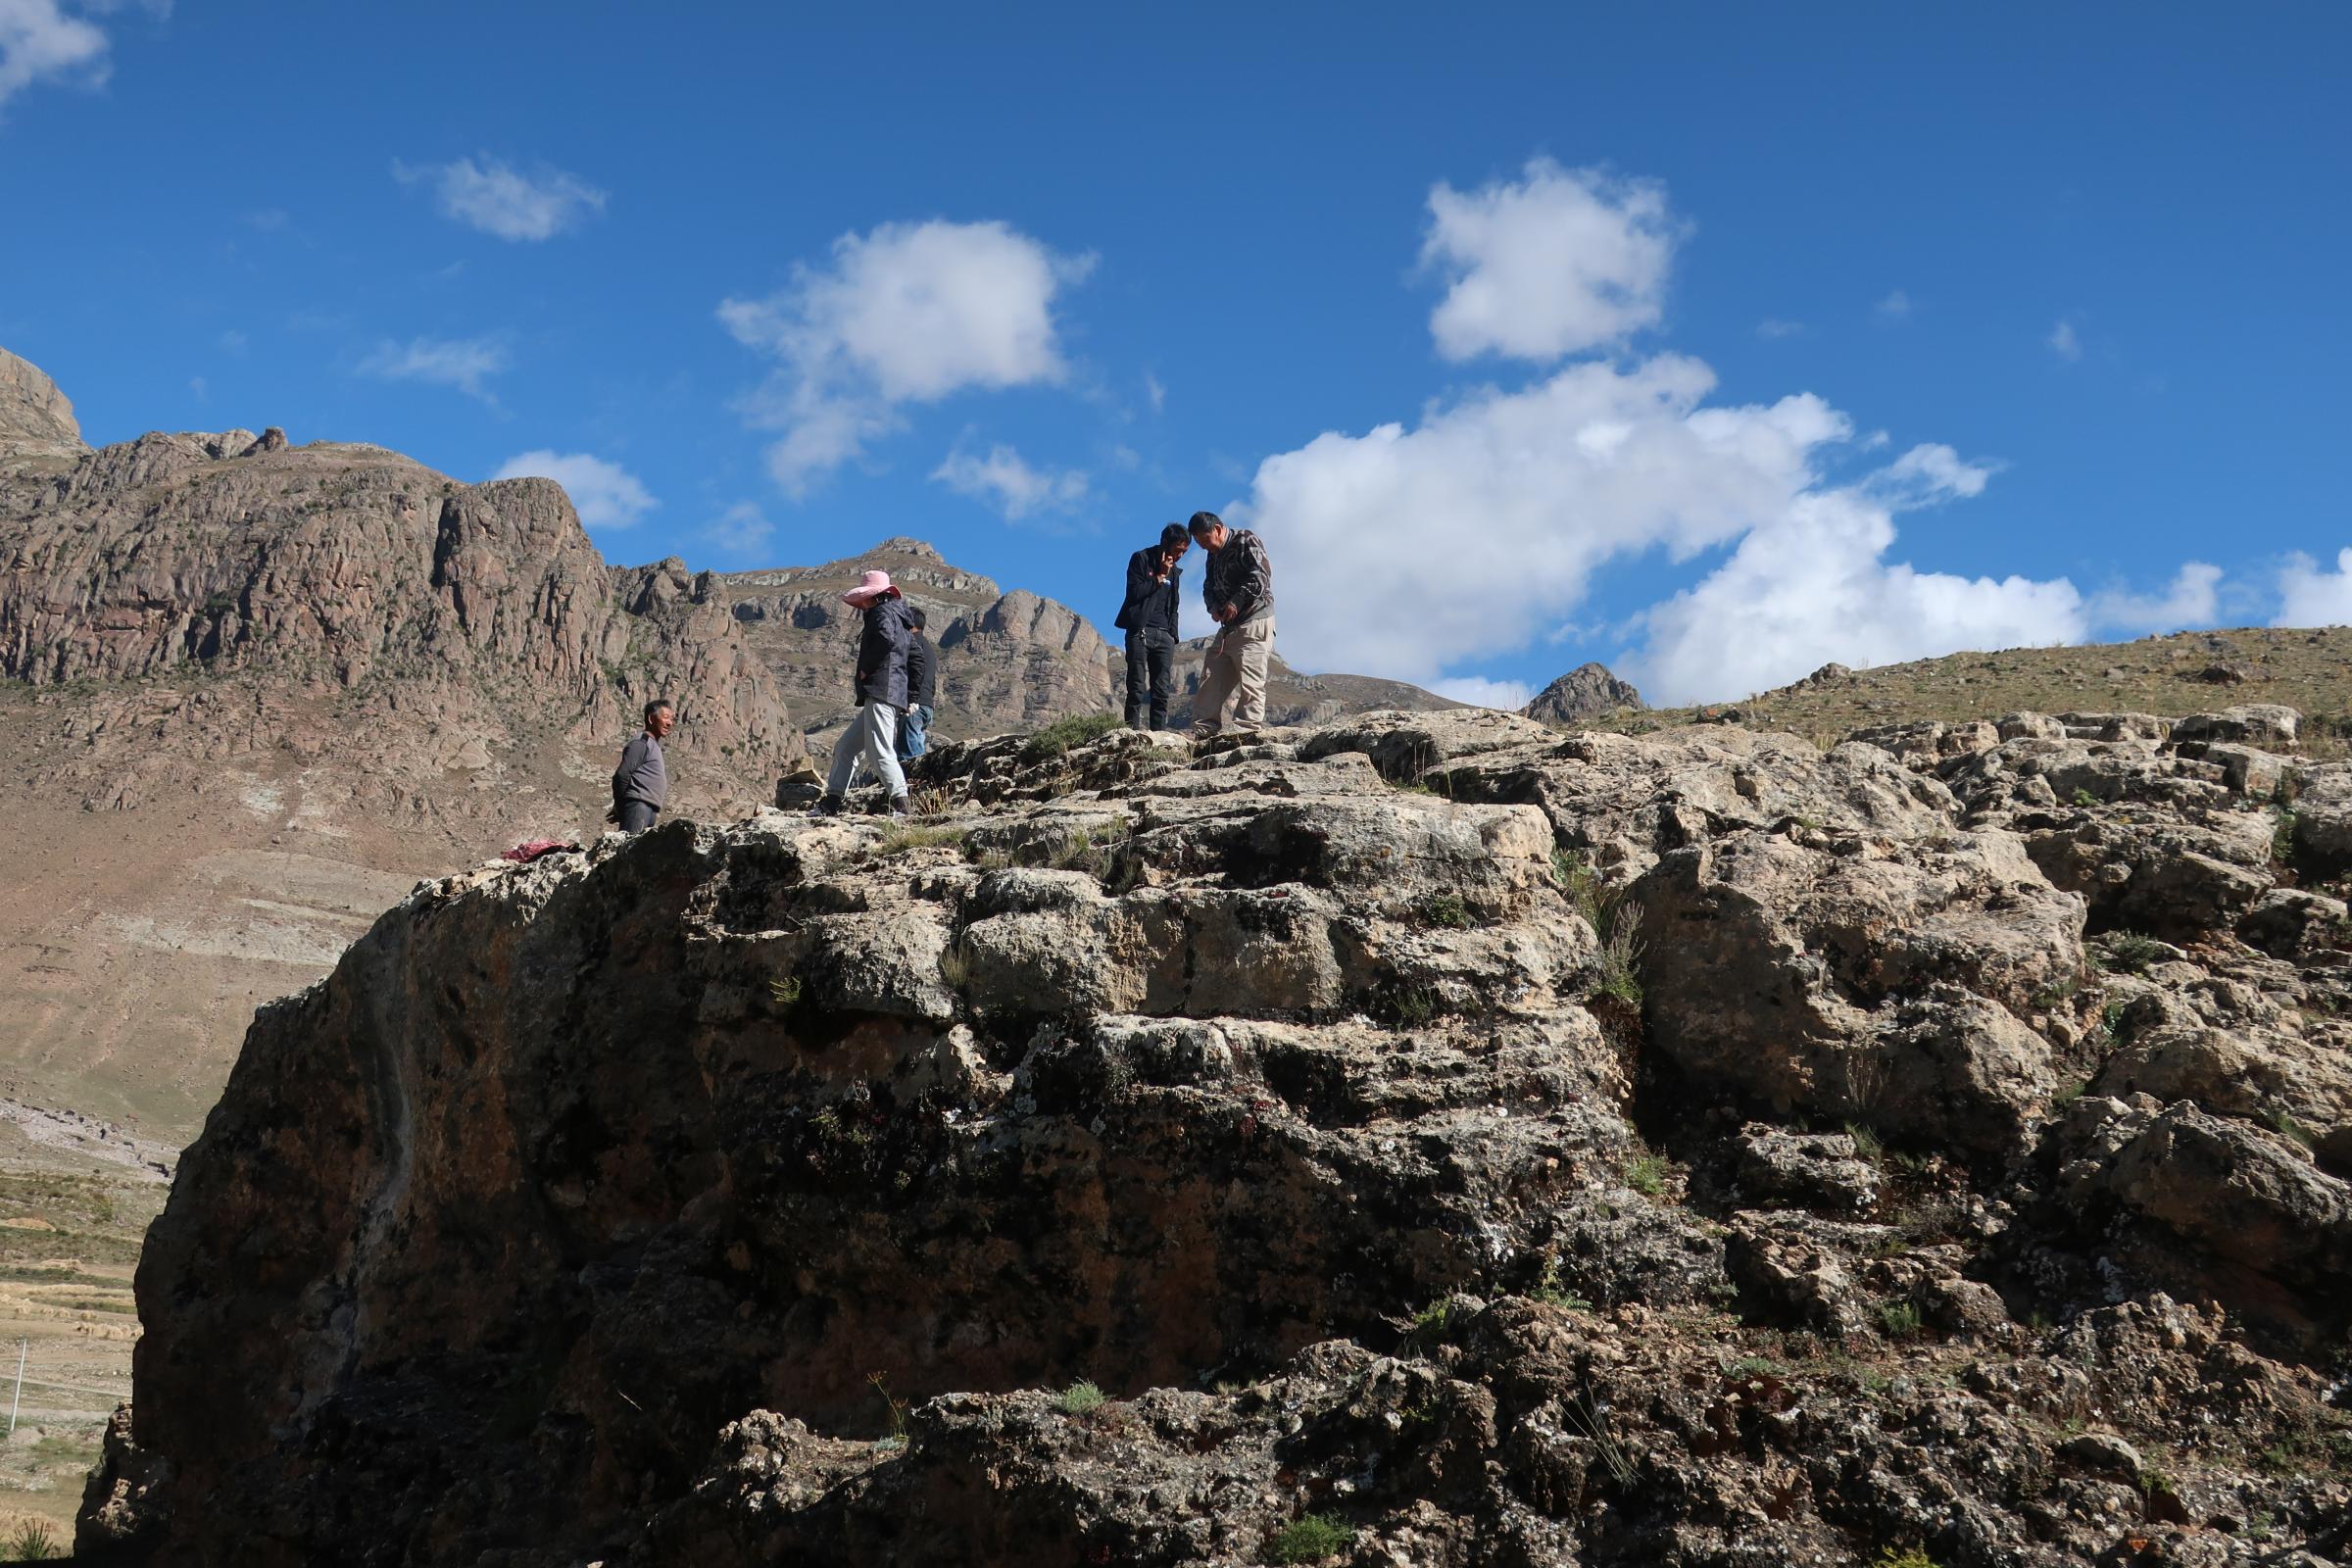 The team led by Dr. David Zhang from Guangzhou University in China visits the research site in Quesang, Tibet where human footprints and handprints thought to be the earliest known cave art were discovered.